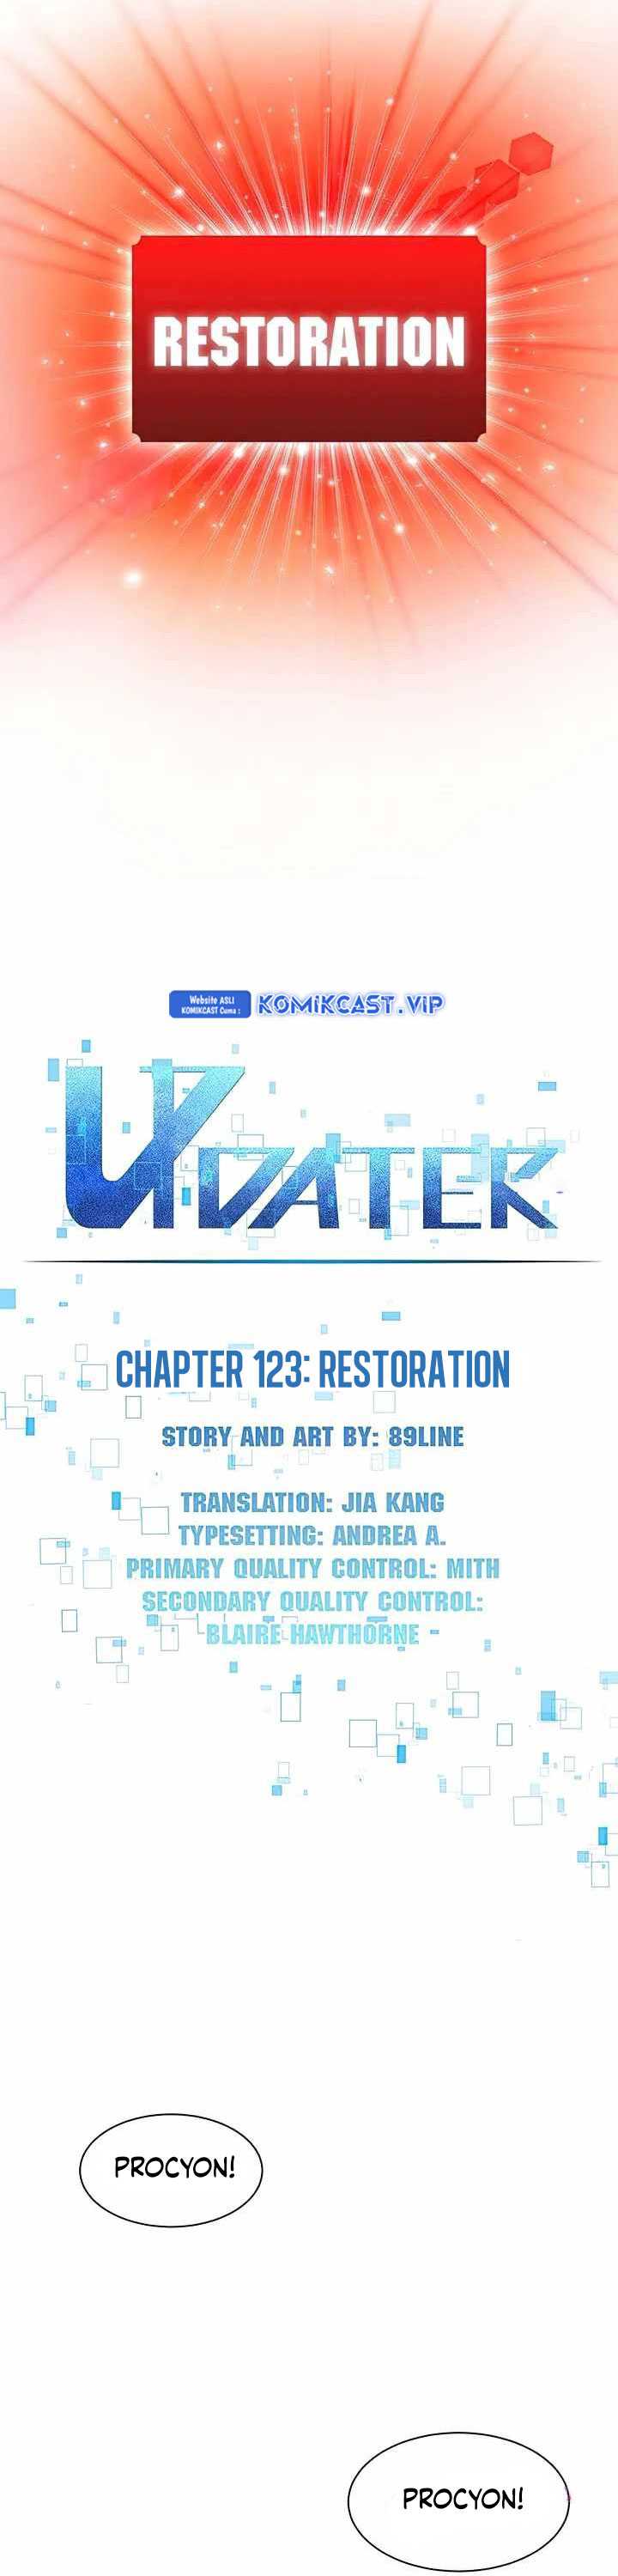 Updater Chapter 123